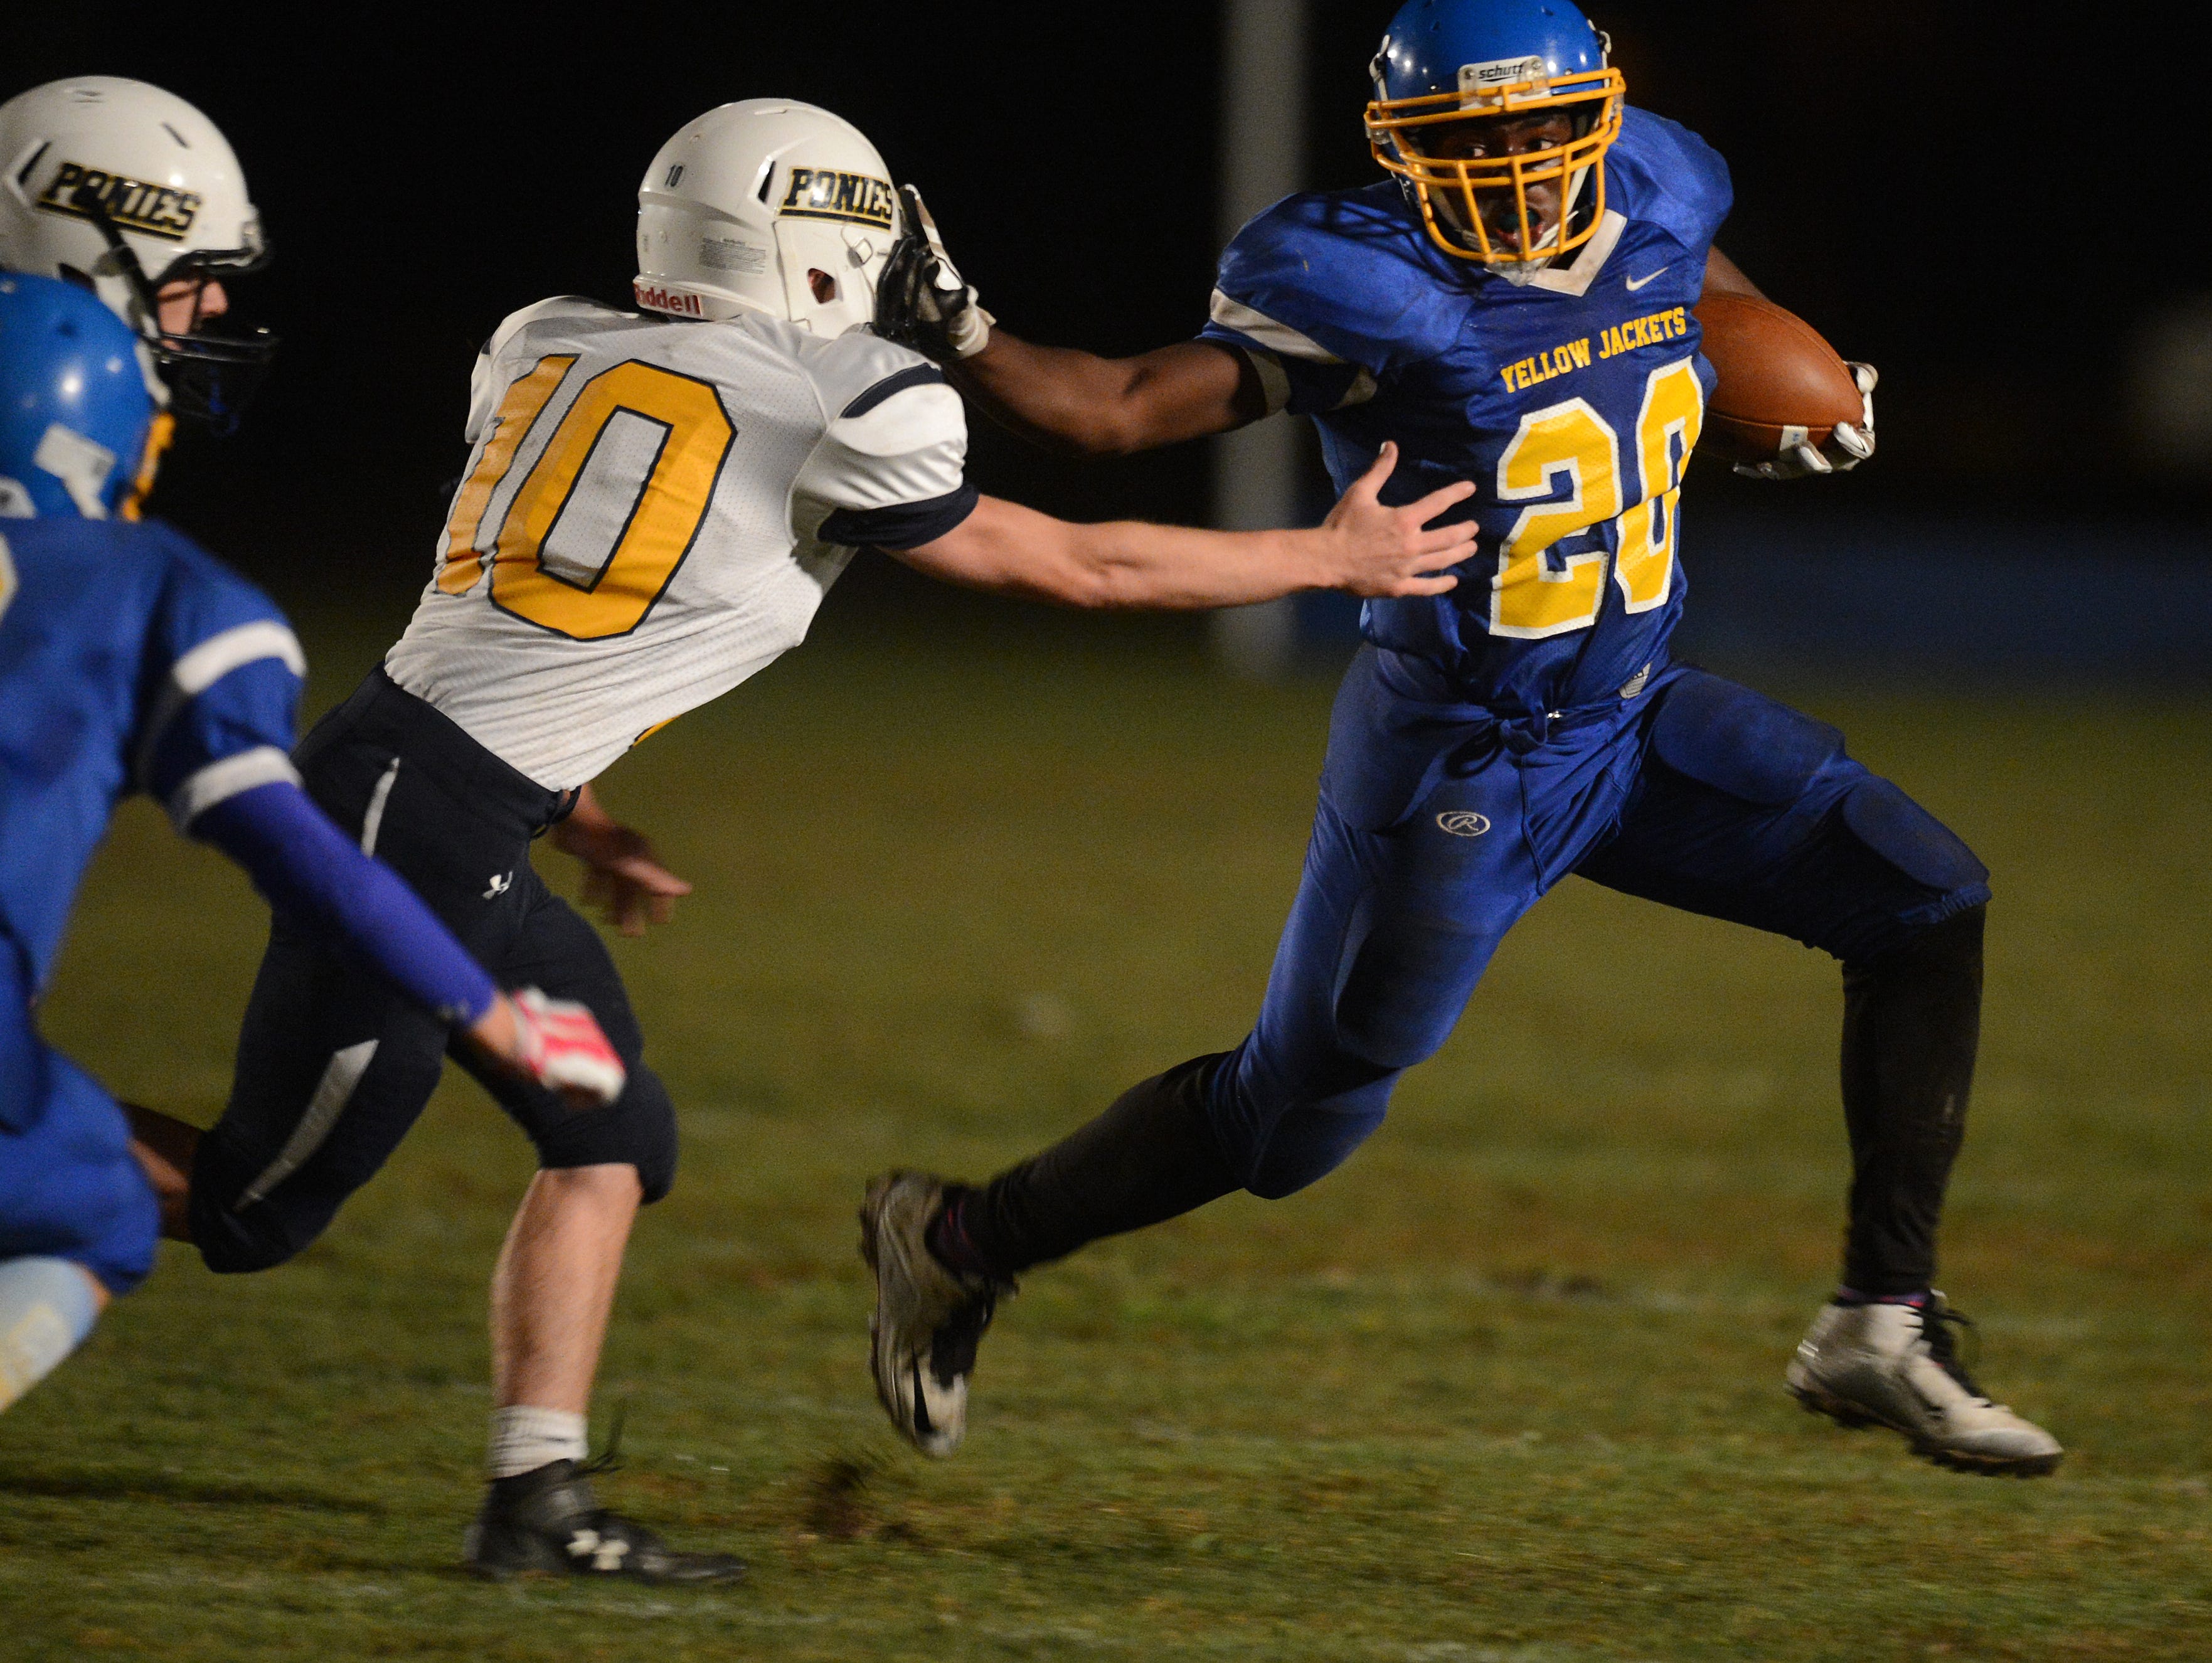 Northampton's Dyshawn Beckett (20) stiff arms Chincoteague's Dustin Holloway (10) as he carries the ball on Friday, Oct. 16, 2015. Chincoteague would win the game 34-28.